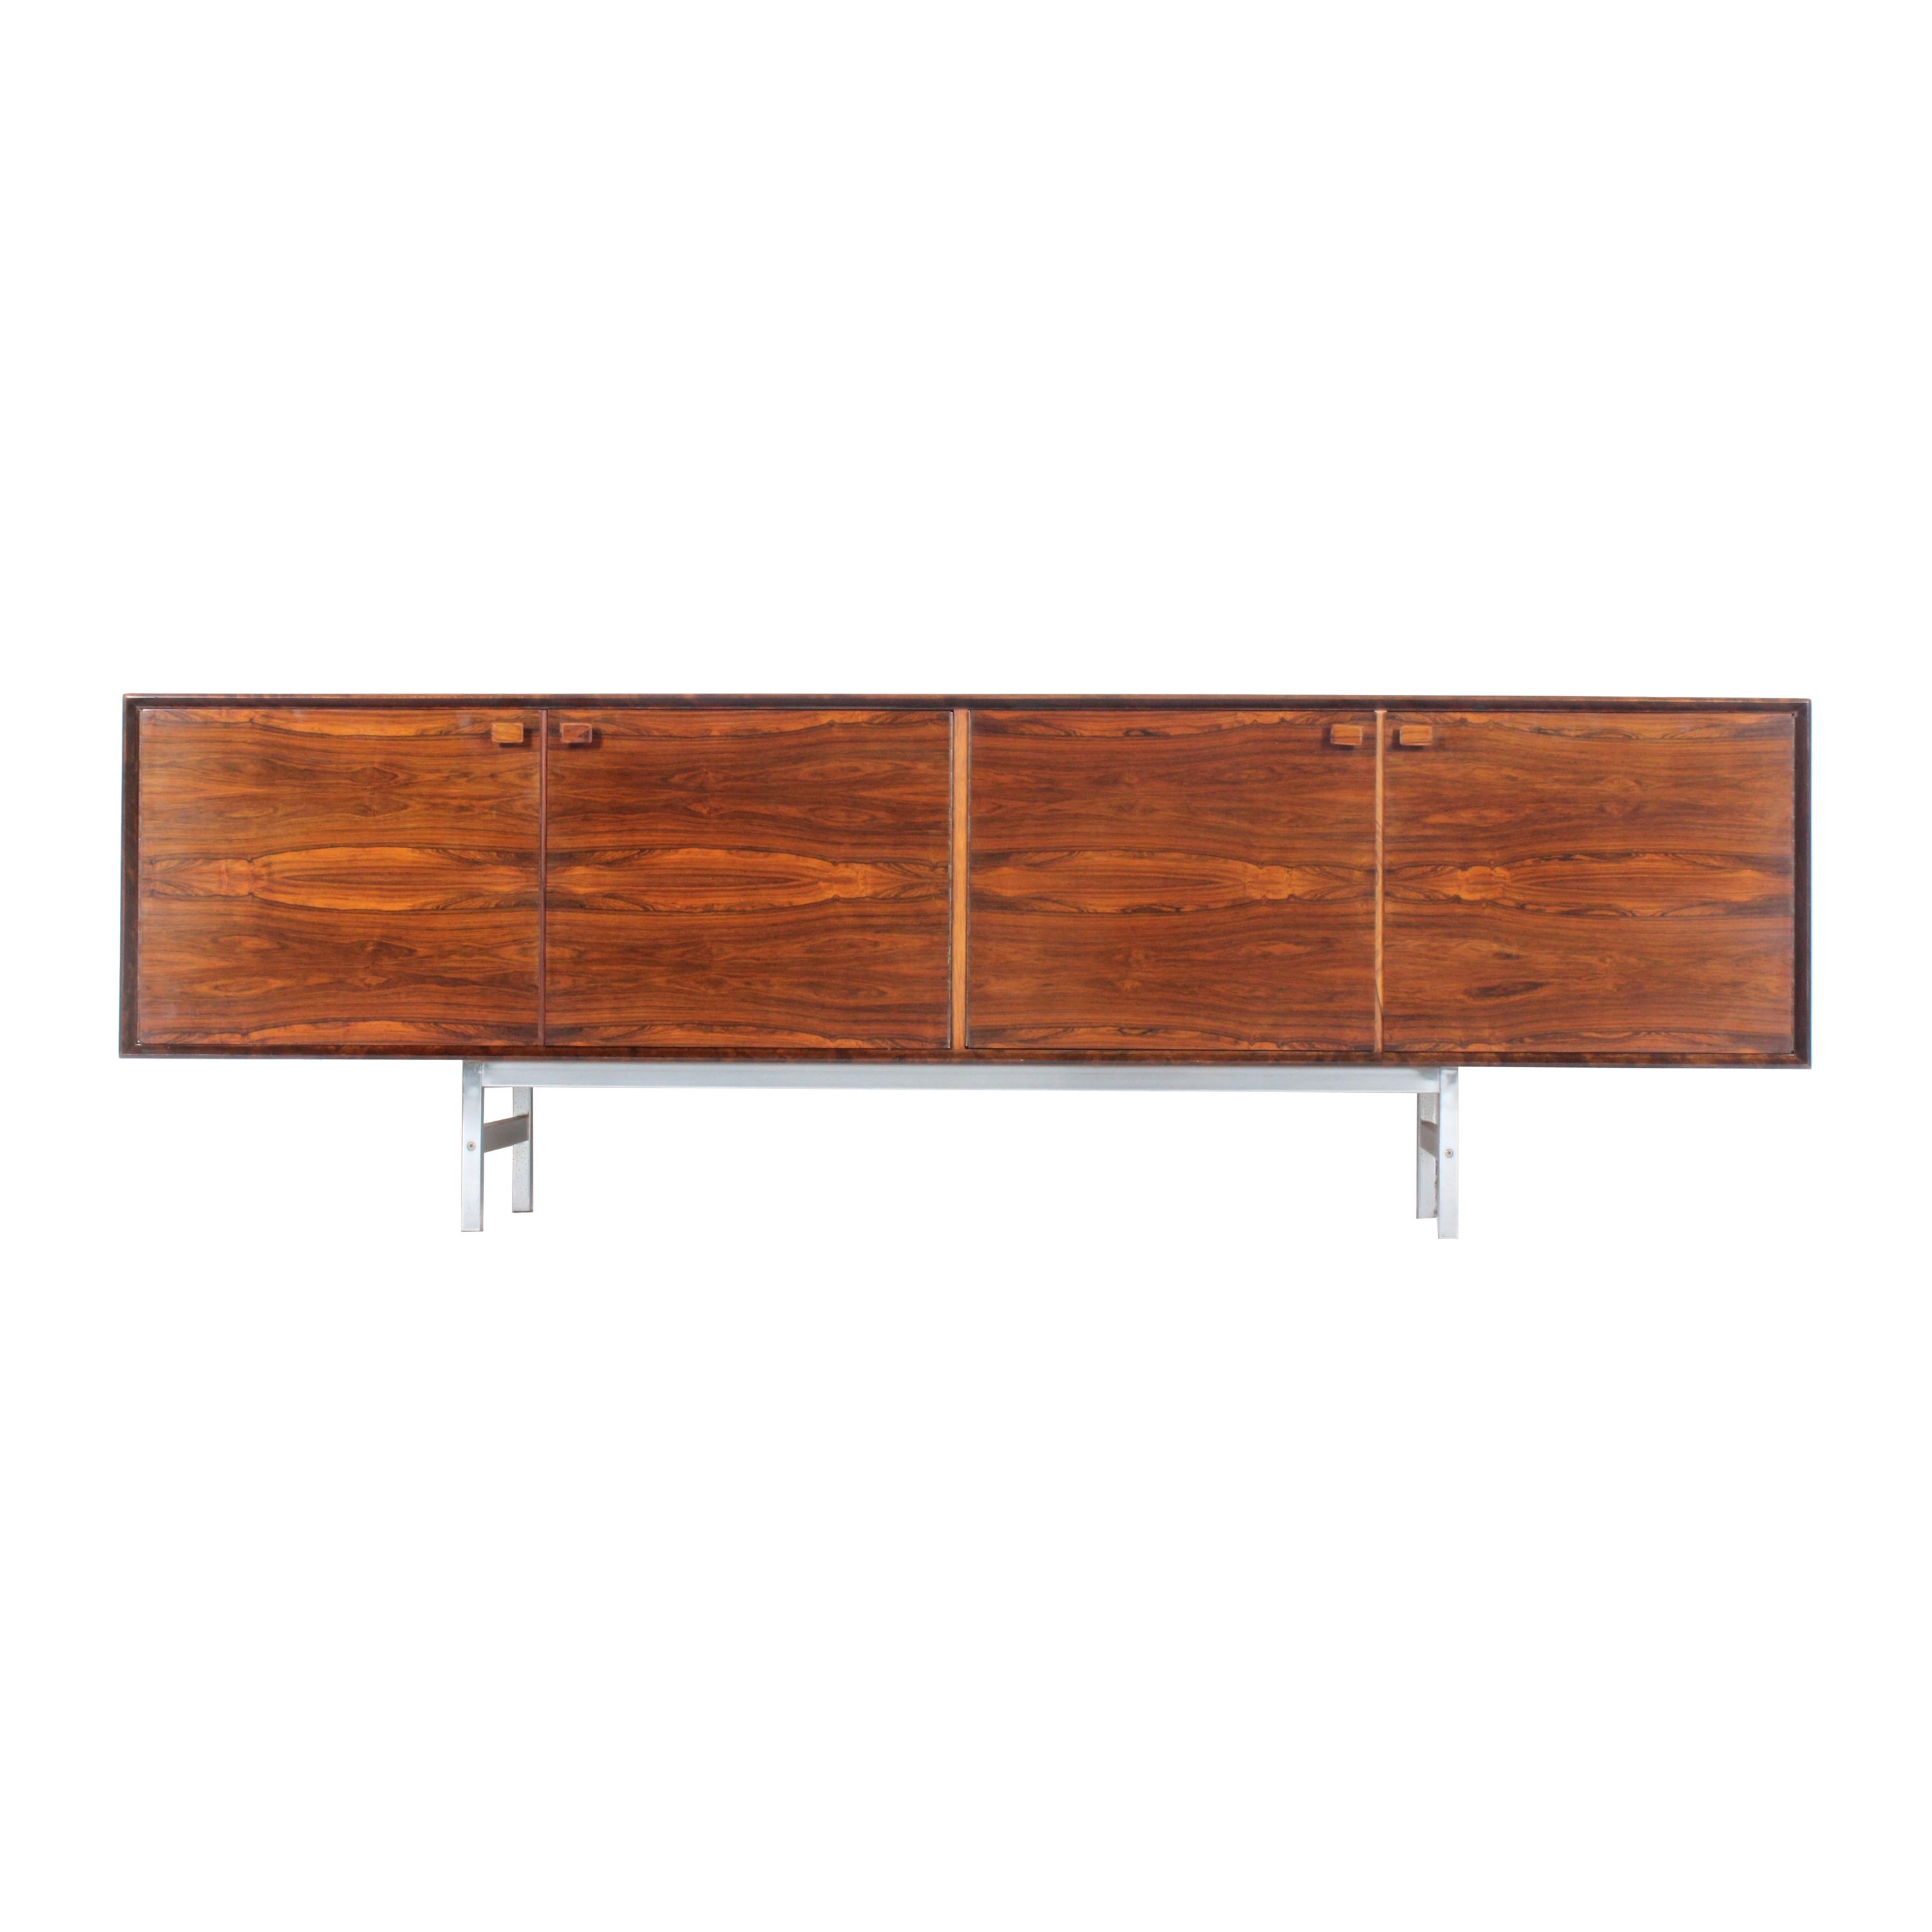 Exceptional Scandinavian  Rio Rosewood Sideboard By Fredrik A Kayser For Sale